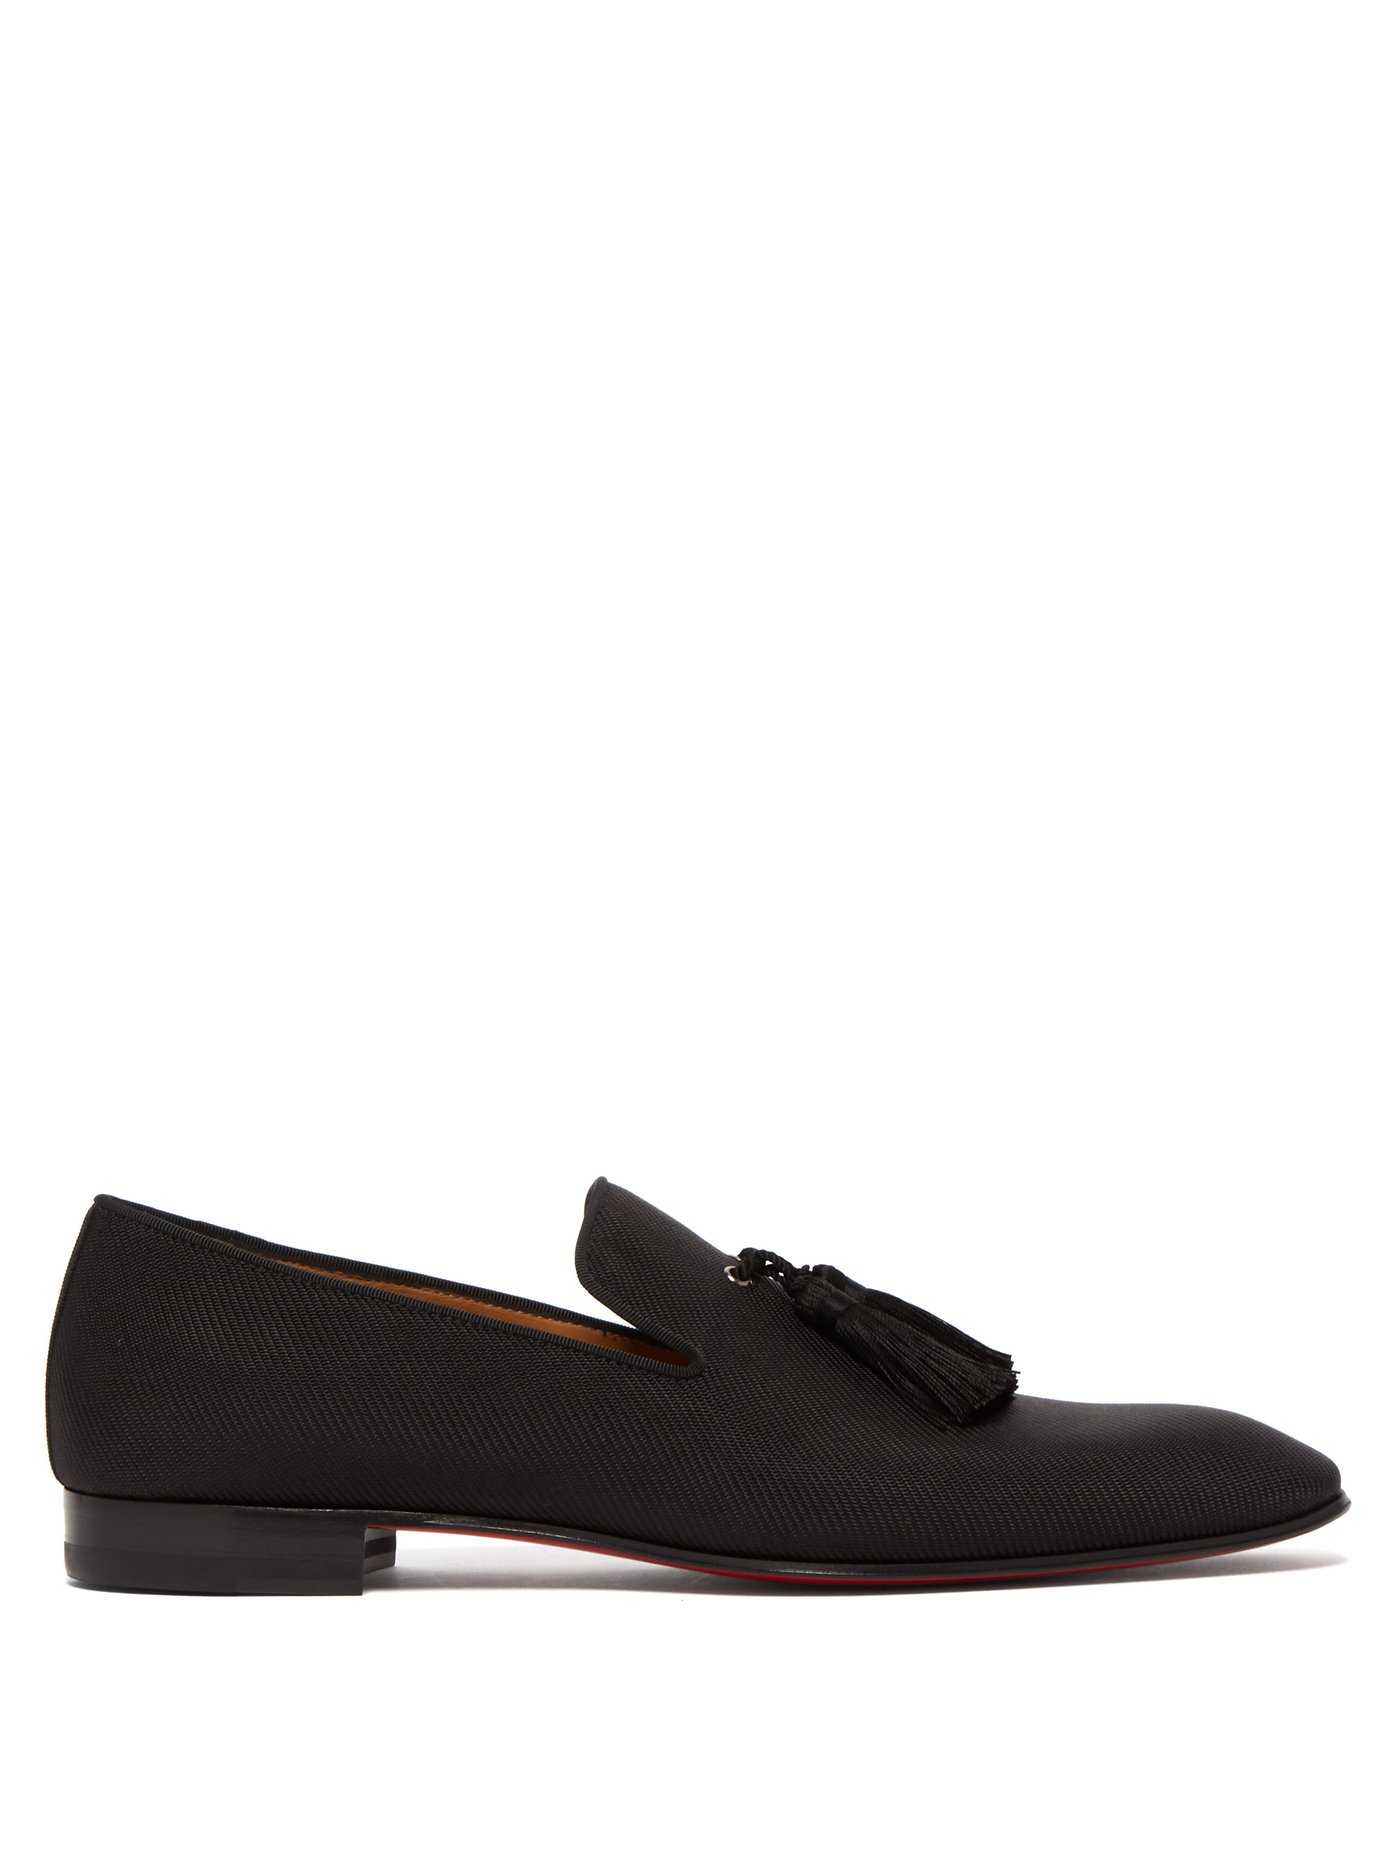 black louboutin loafers